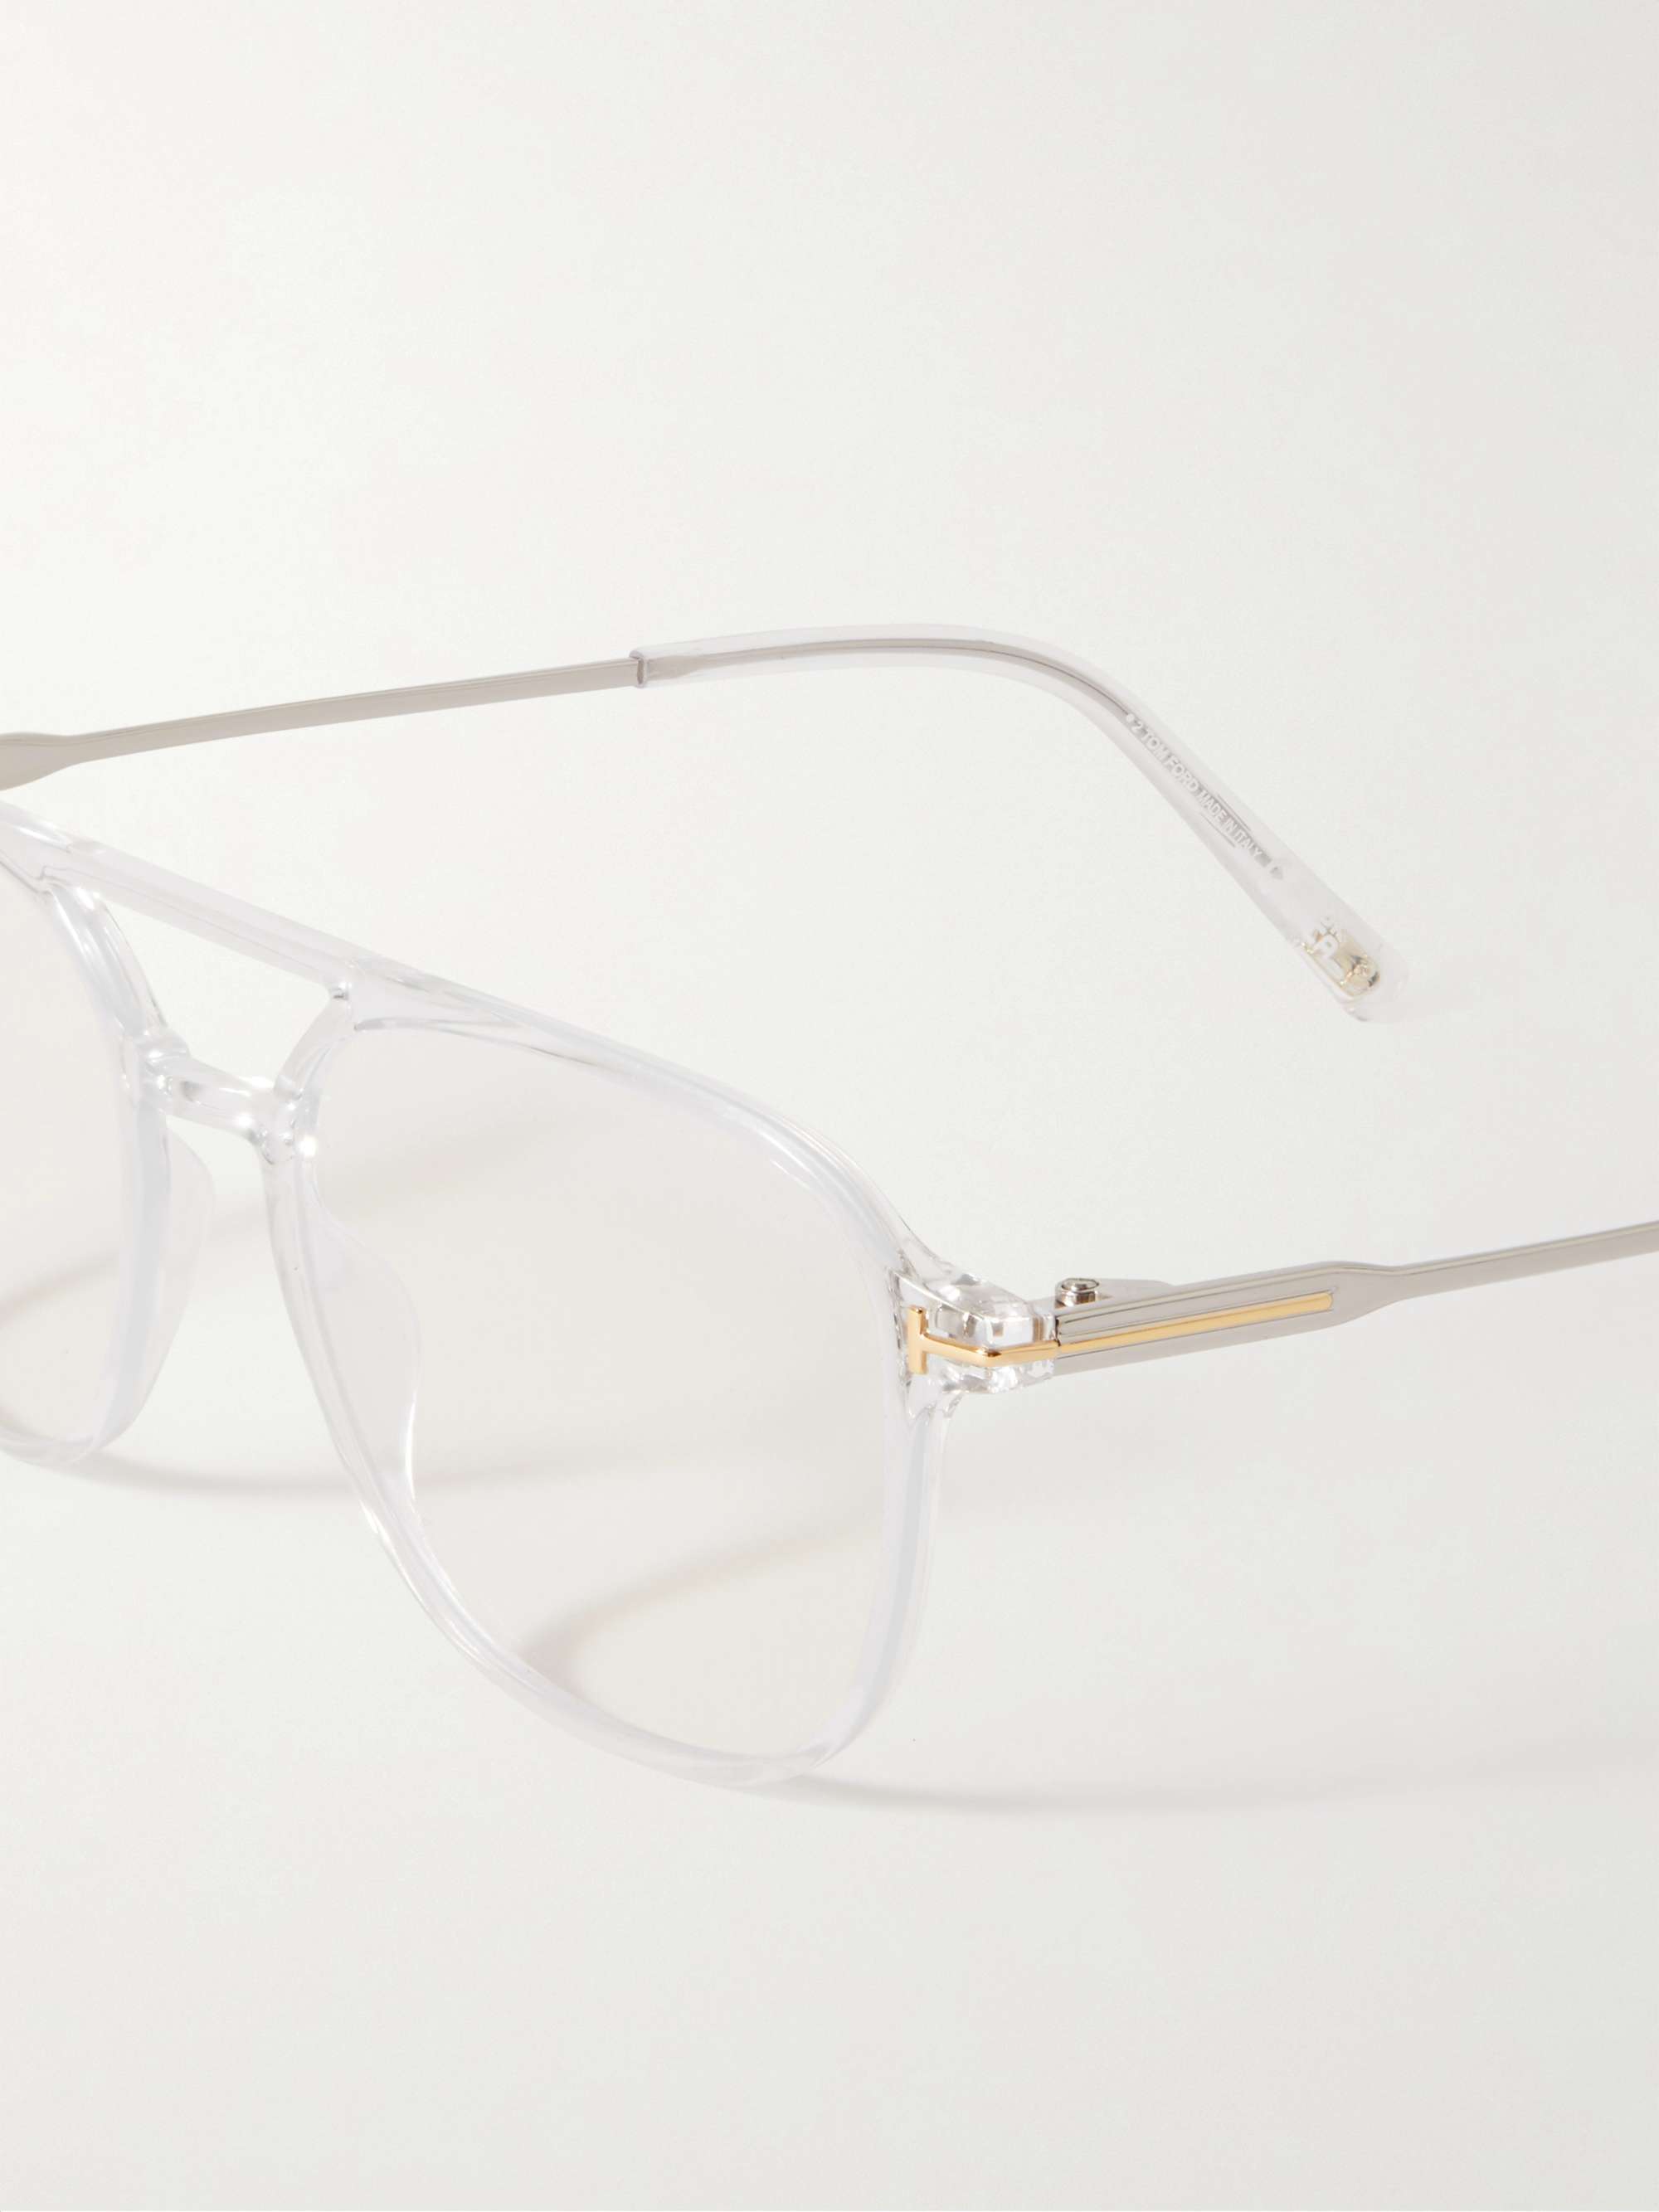 TOM FORD Aviator-Style Acetate and Silver-Tone Optical Glasses | MR PORTER